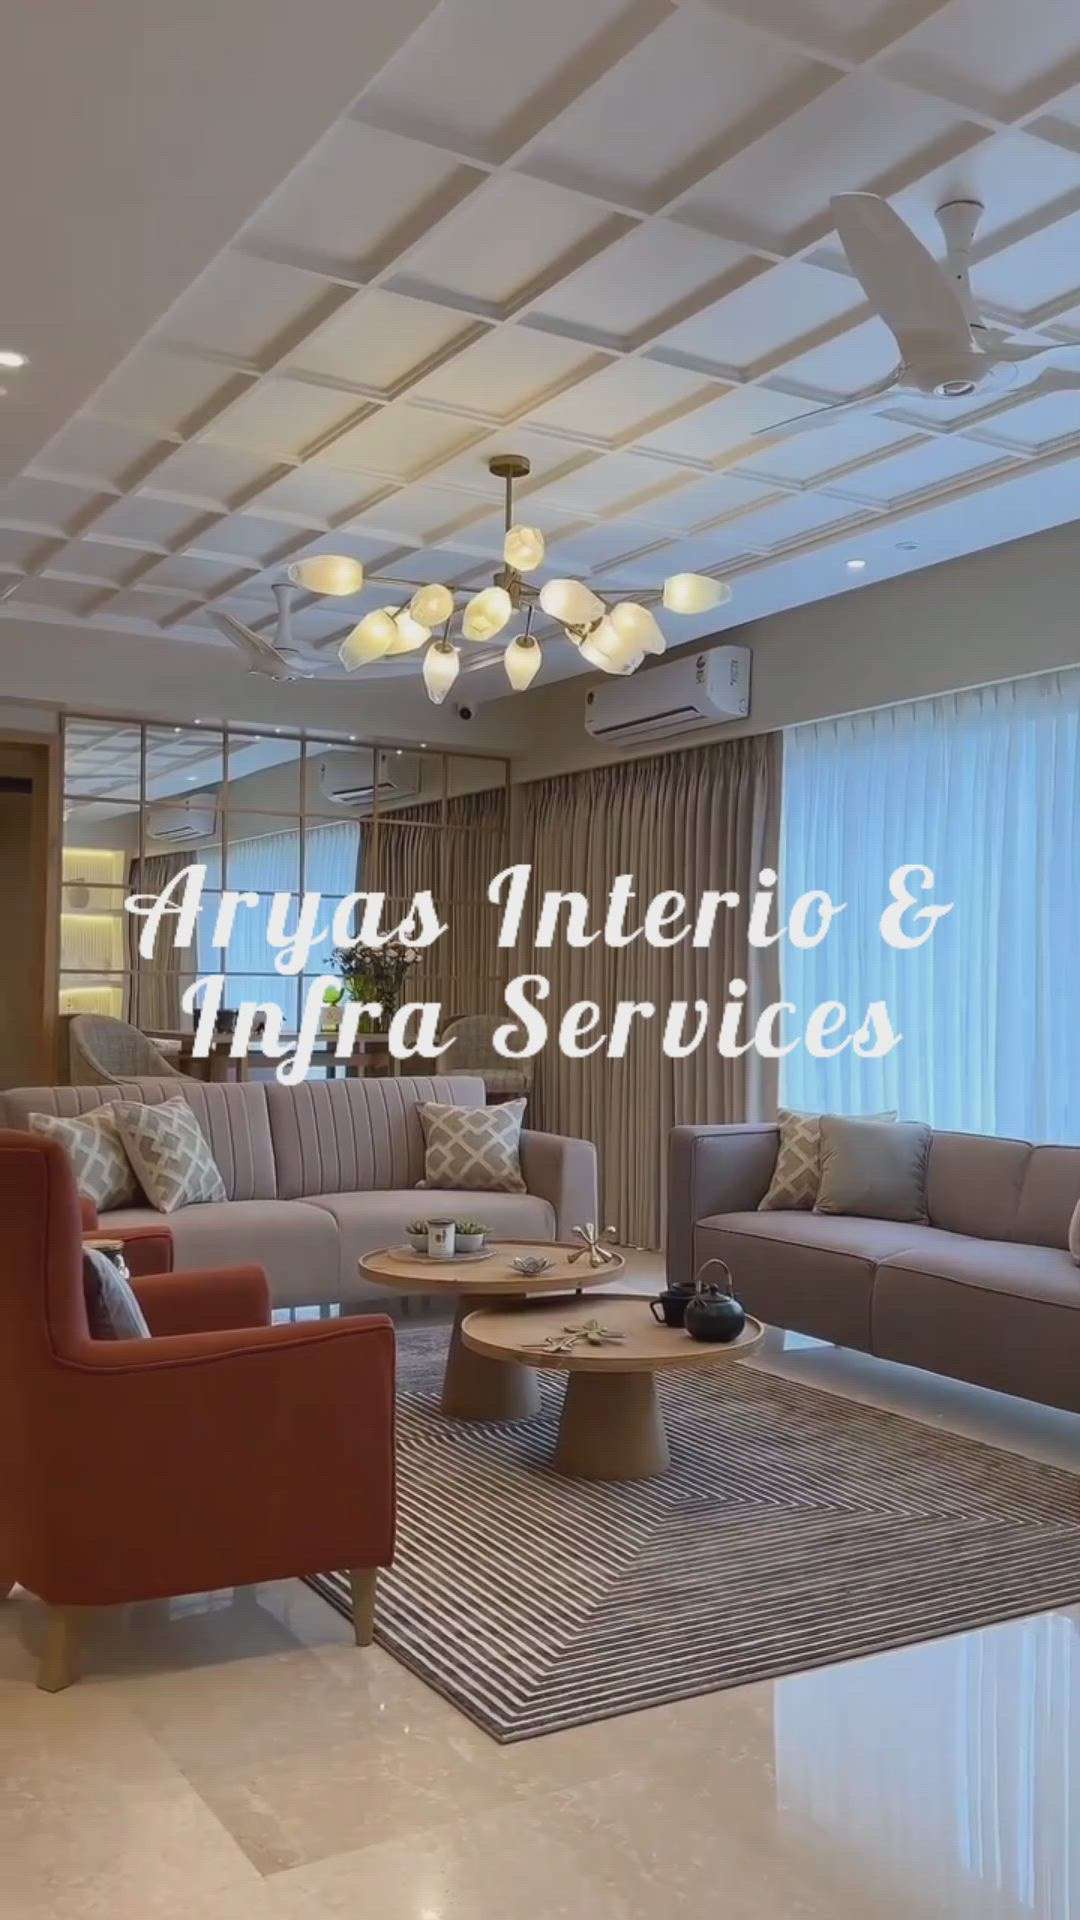 Festival season give your home a new look, luxury flat interiors services by Design Interios a unit of Aryas interio & Infra Group,
Provide complete end to end Professional Construction & interior Services in Delhi Ncr, Gurugram, Ghaziabad, Noida, Greater Noida, Faridabad, chandigarh, Manali and Shimla. Contact us right now for any interior or renovation work, call us @ +91-7018188569 &
Visit our website at www.designinterios.com
Follow us on Instagram #aryasinterio and Facebook @aryasinterio .
#uttarpradesh #construction_himachal
#noidainterior #noida #delhincr #delhi #Delhihome  #noidaconstruction #interiordesign #interior #interiors #interiordesigner #interiordecor #interiorstyling #delhiinteriors #greaternoida #faridabad #ghaziabadinterior #ghaziabad  #chandigarh